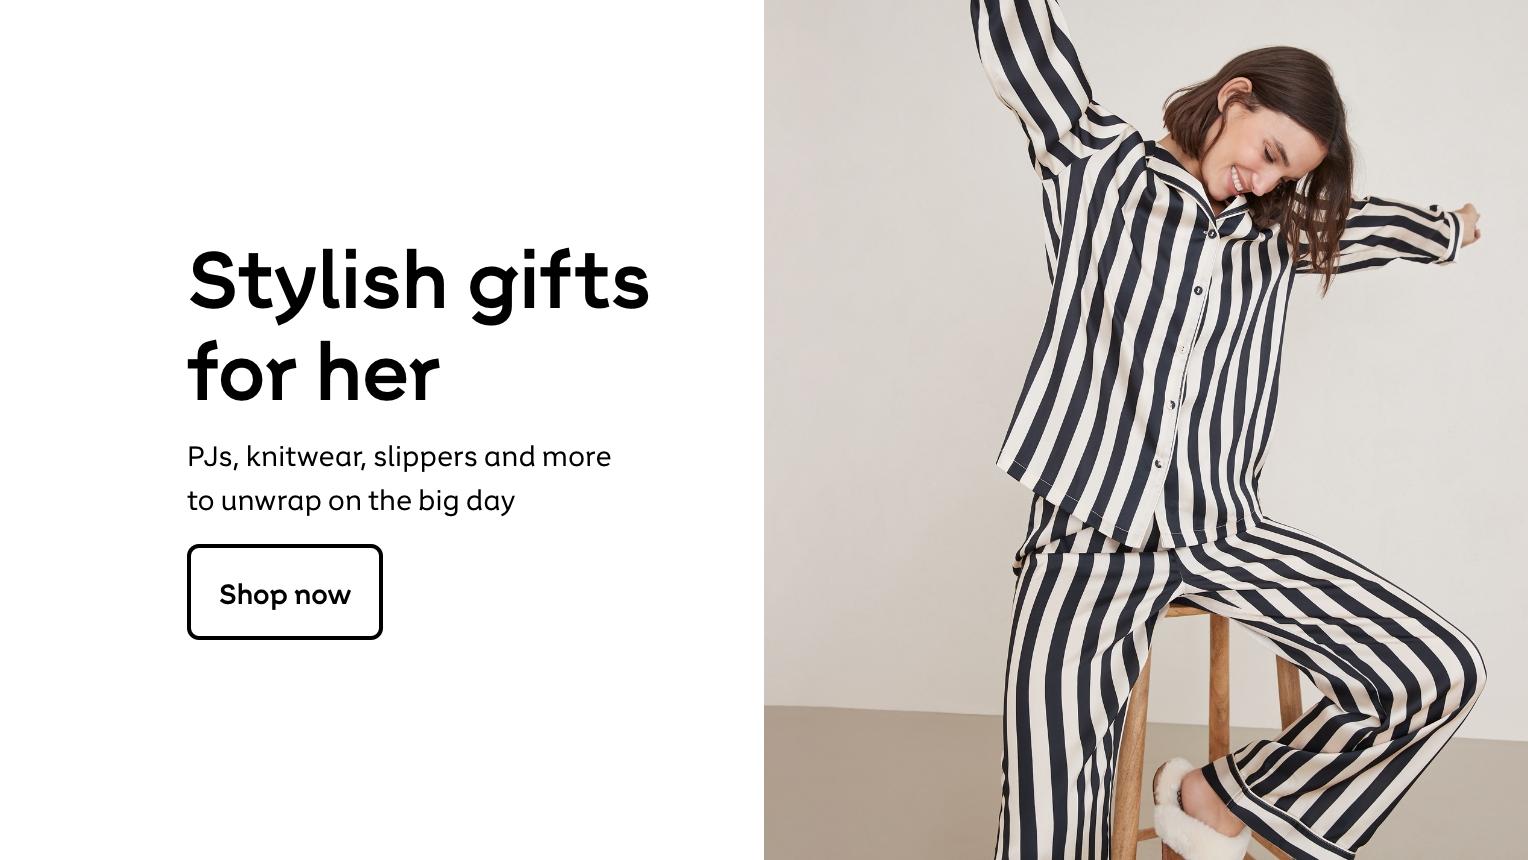 Stylish gifts
for her
PJs, knitwear, slippers and more
to unwrap on the big day
shop now